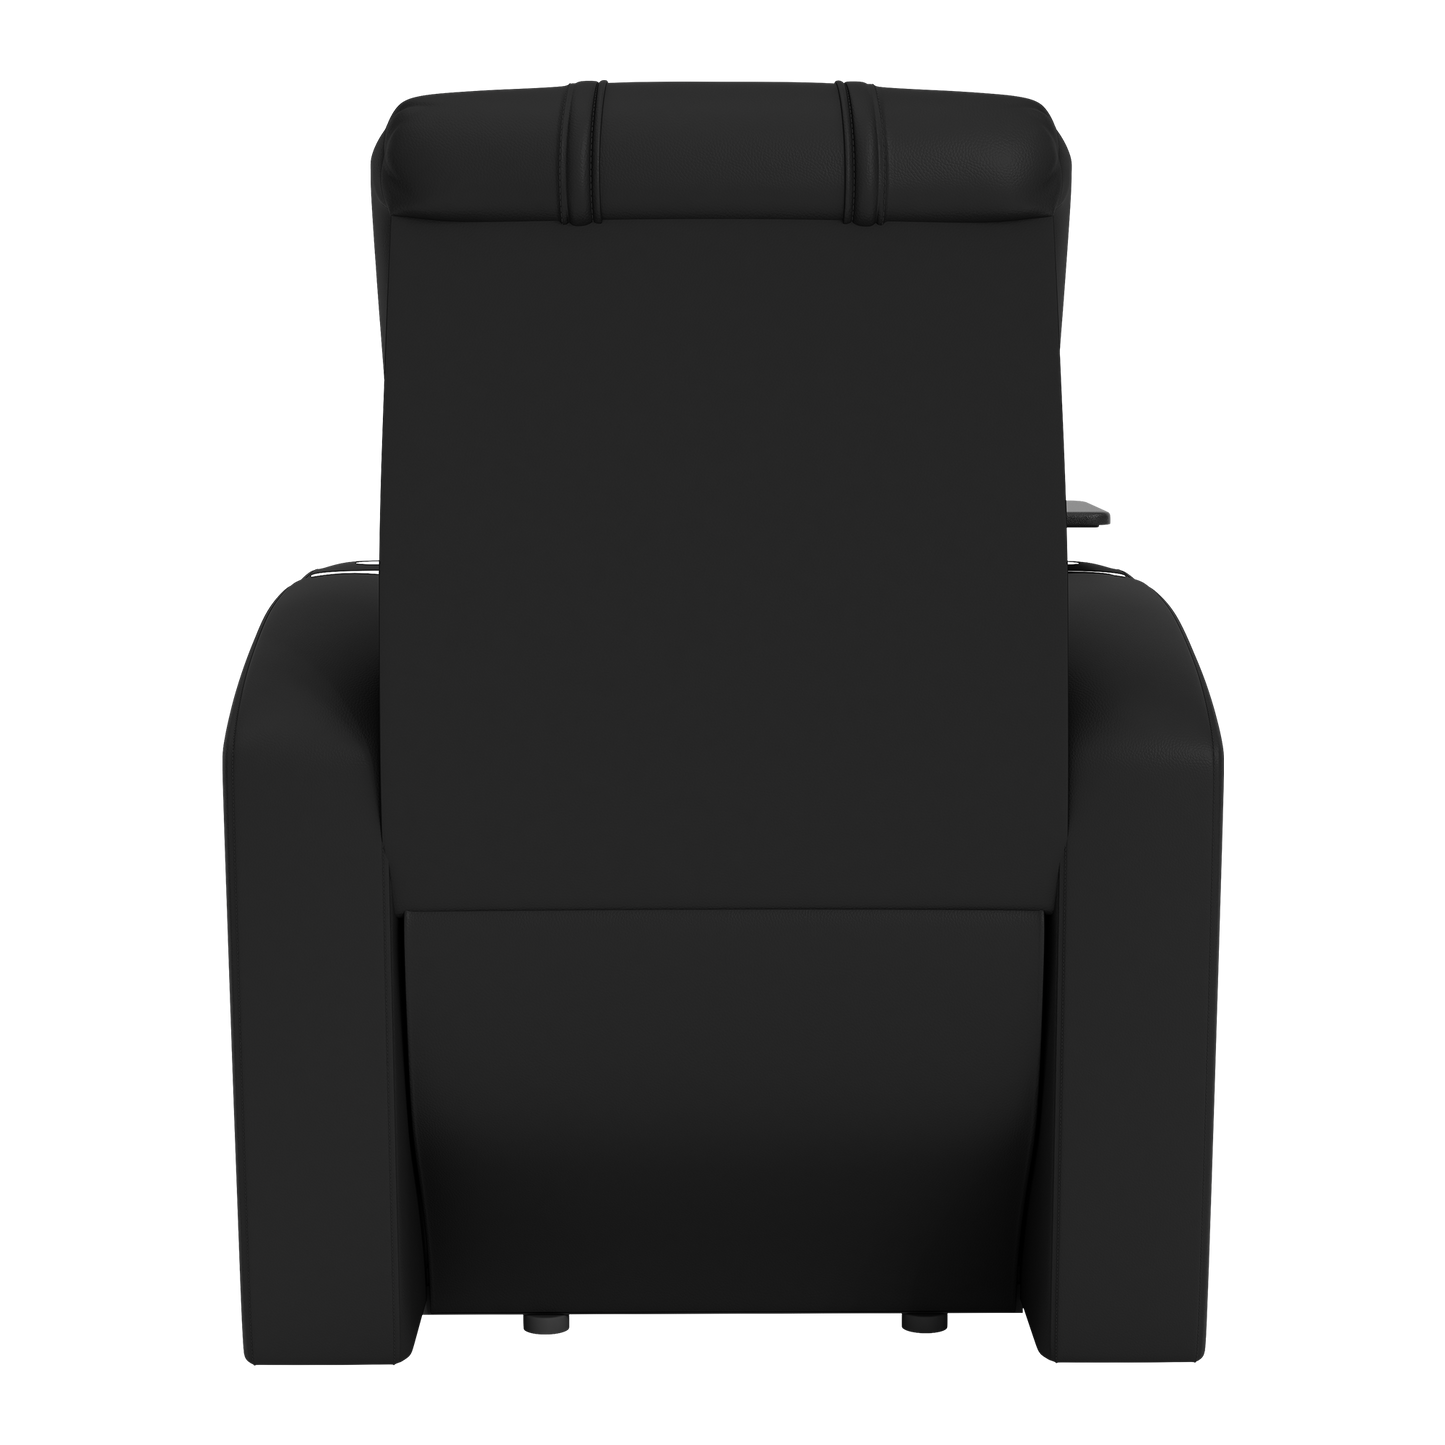 Stealth Power Plus Recliner with Youngstown Pete Logo